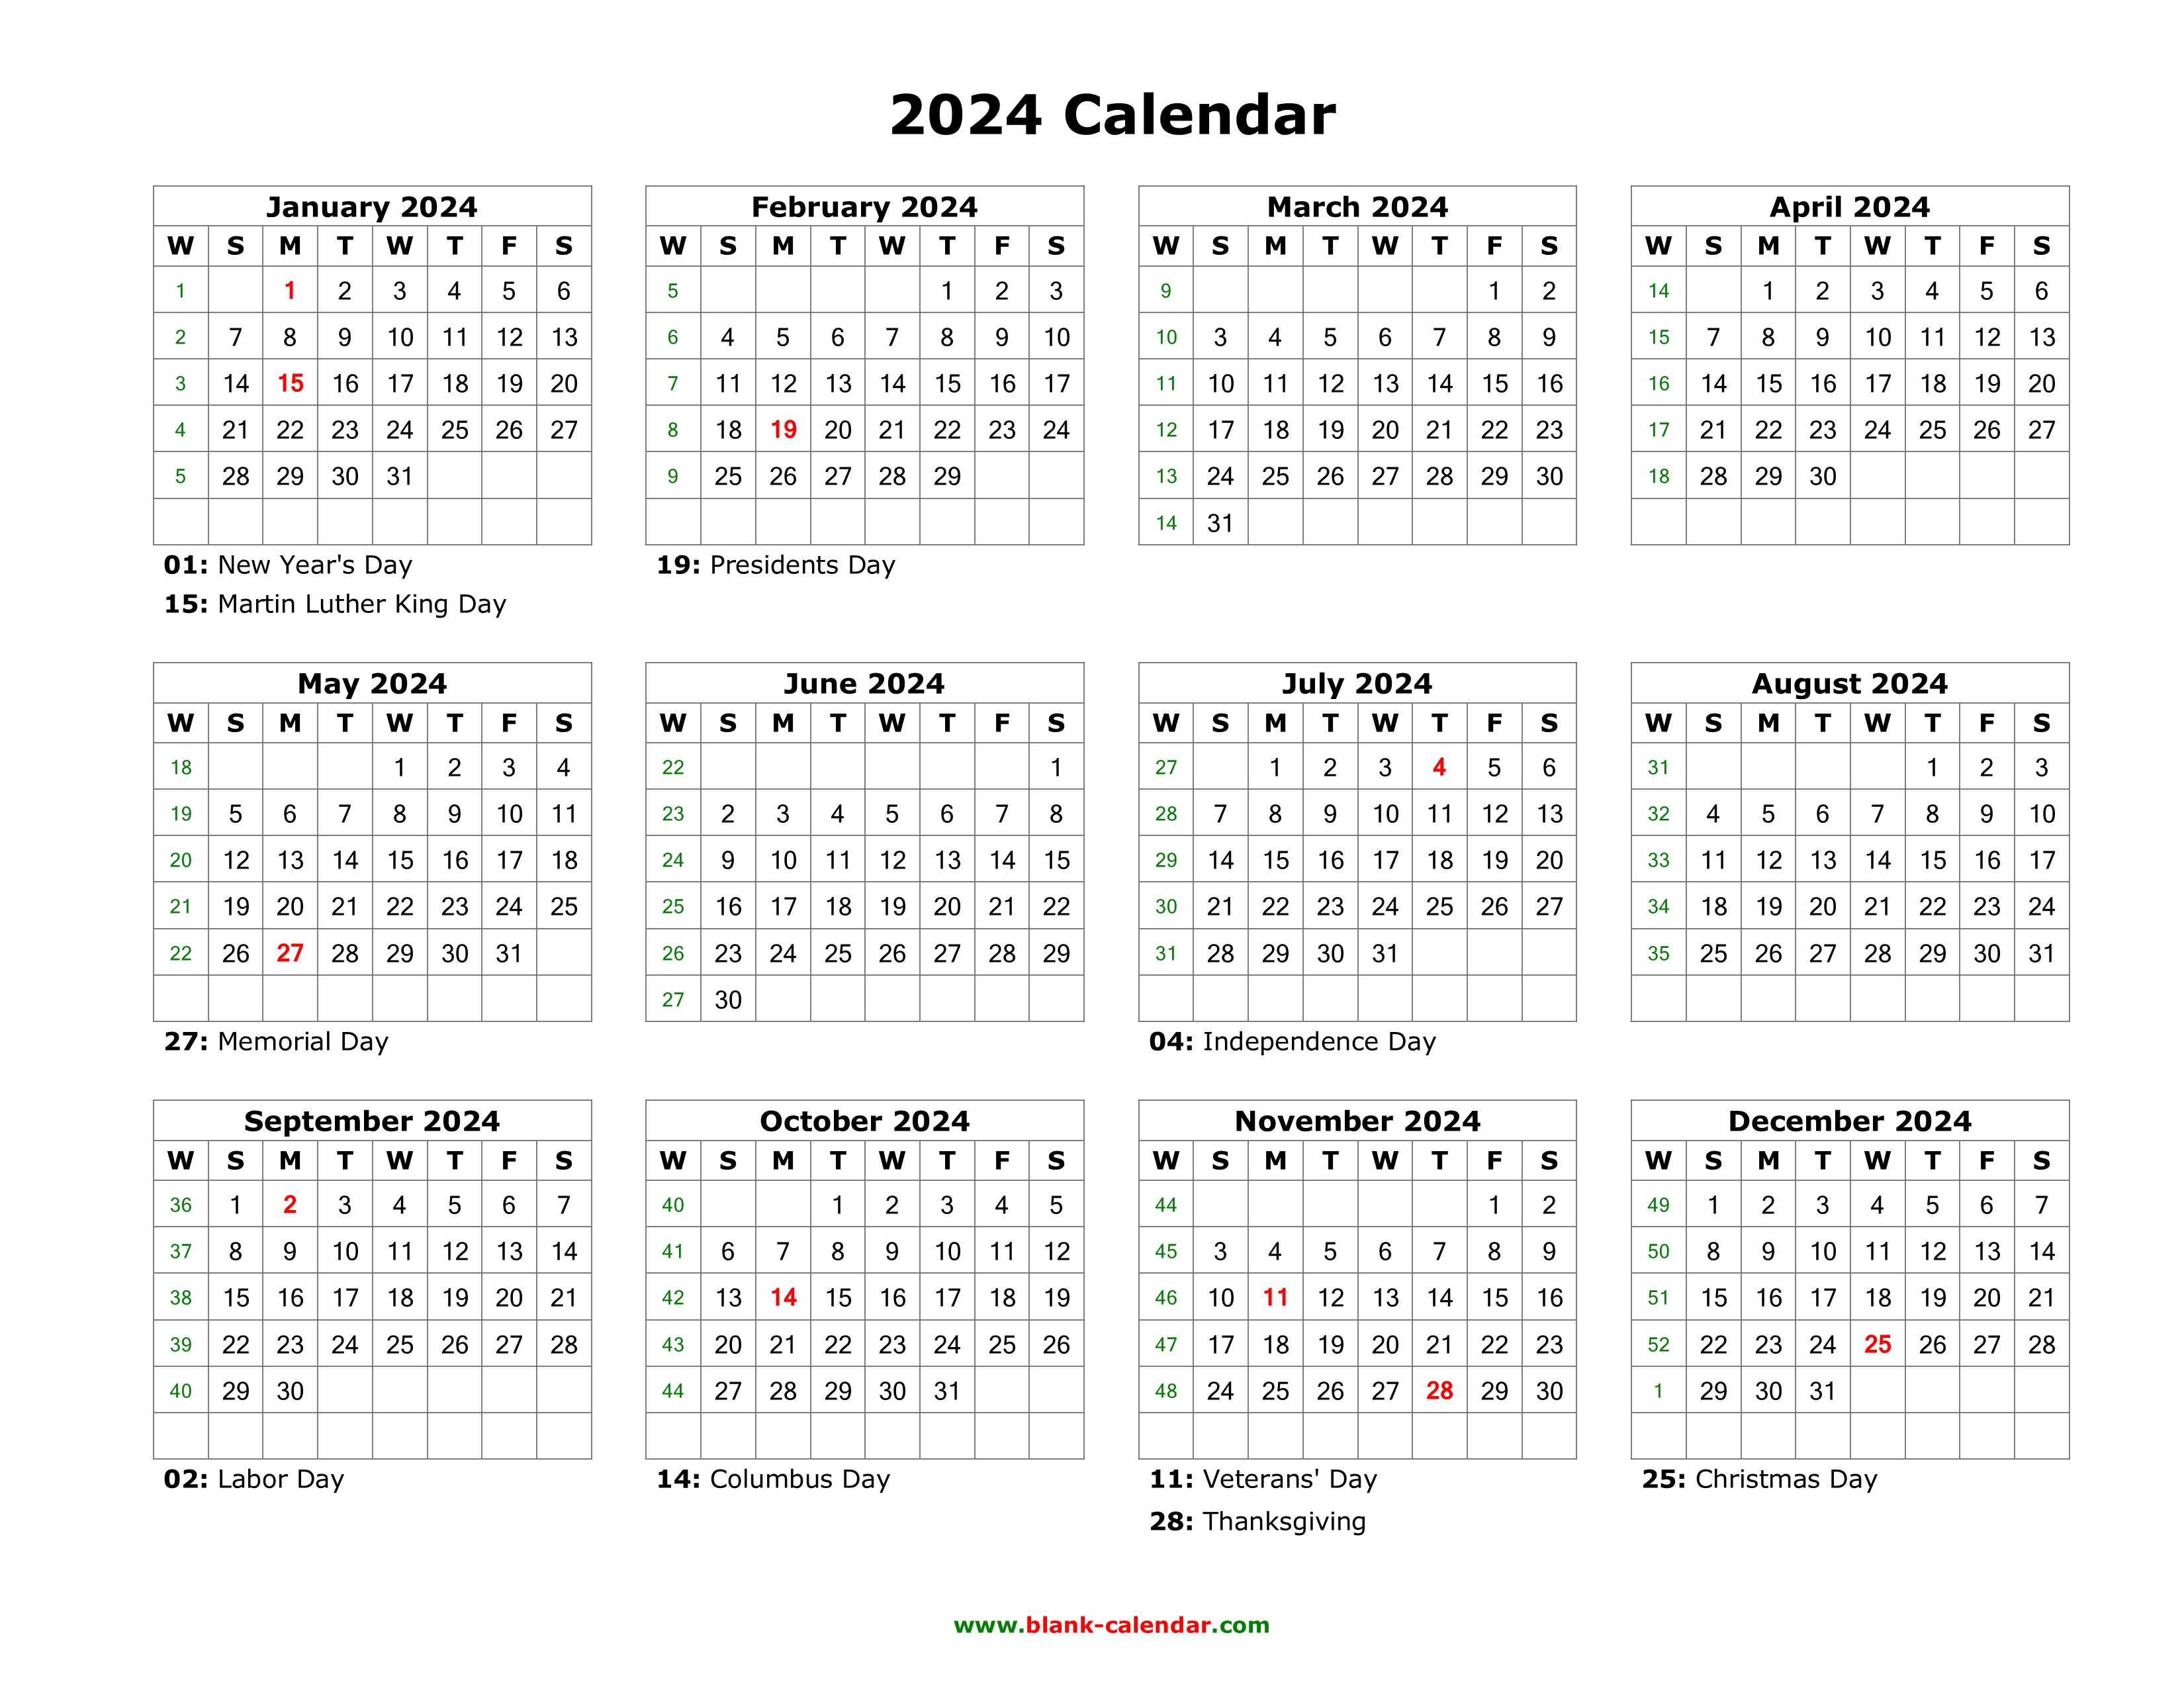 download-blank-calendar-2024-with-us-holidays-12-months-on-one-page